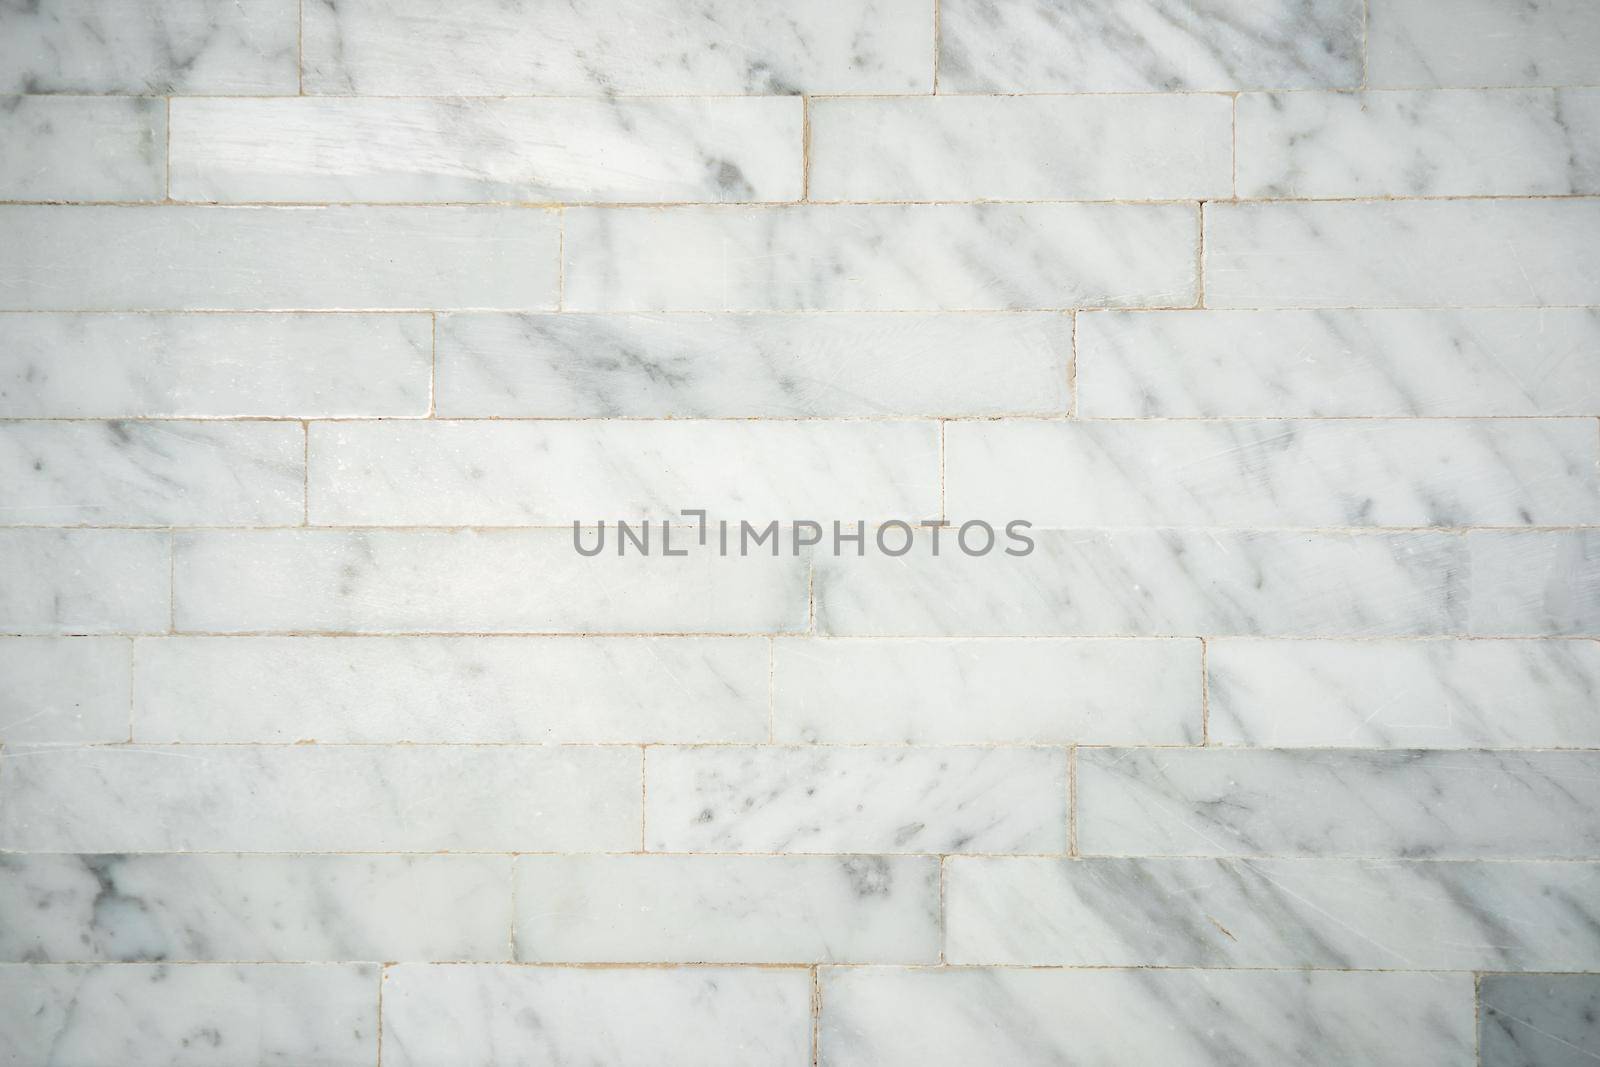 Pattern square shape of tile surface on white marble decorative wall. by sirawit99